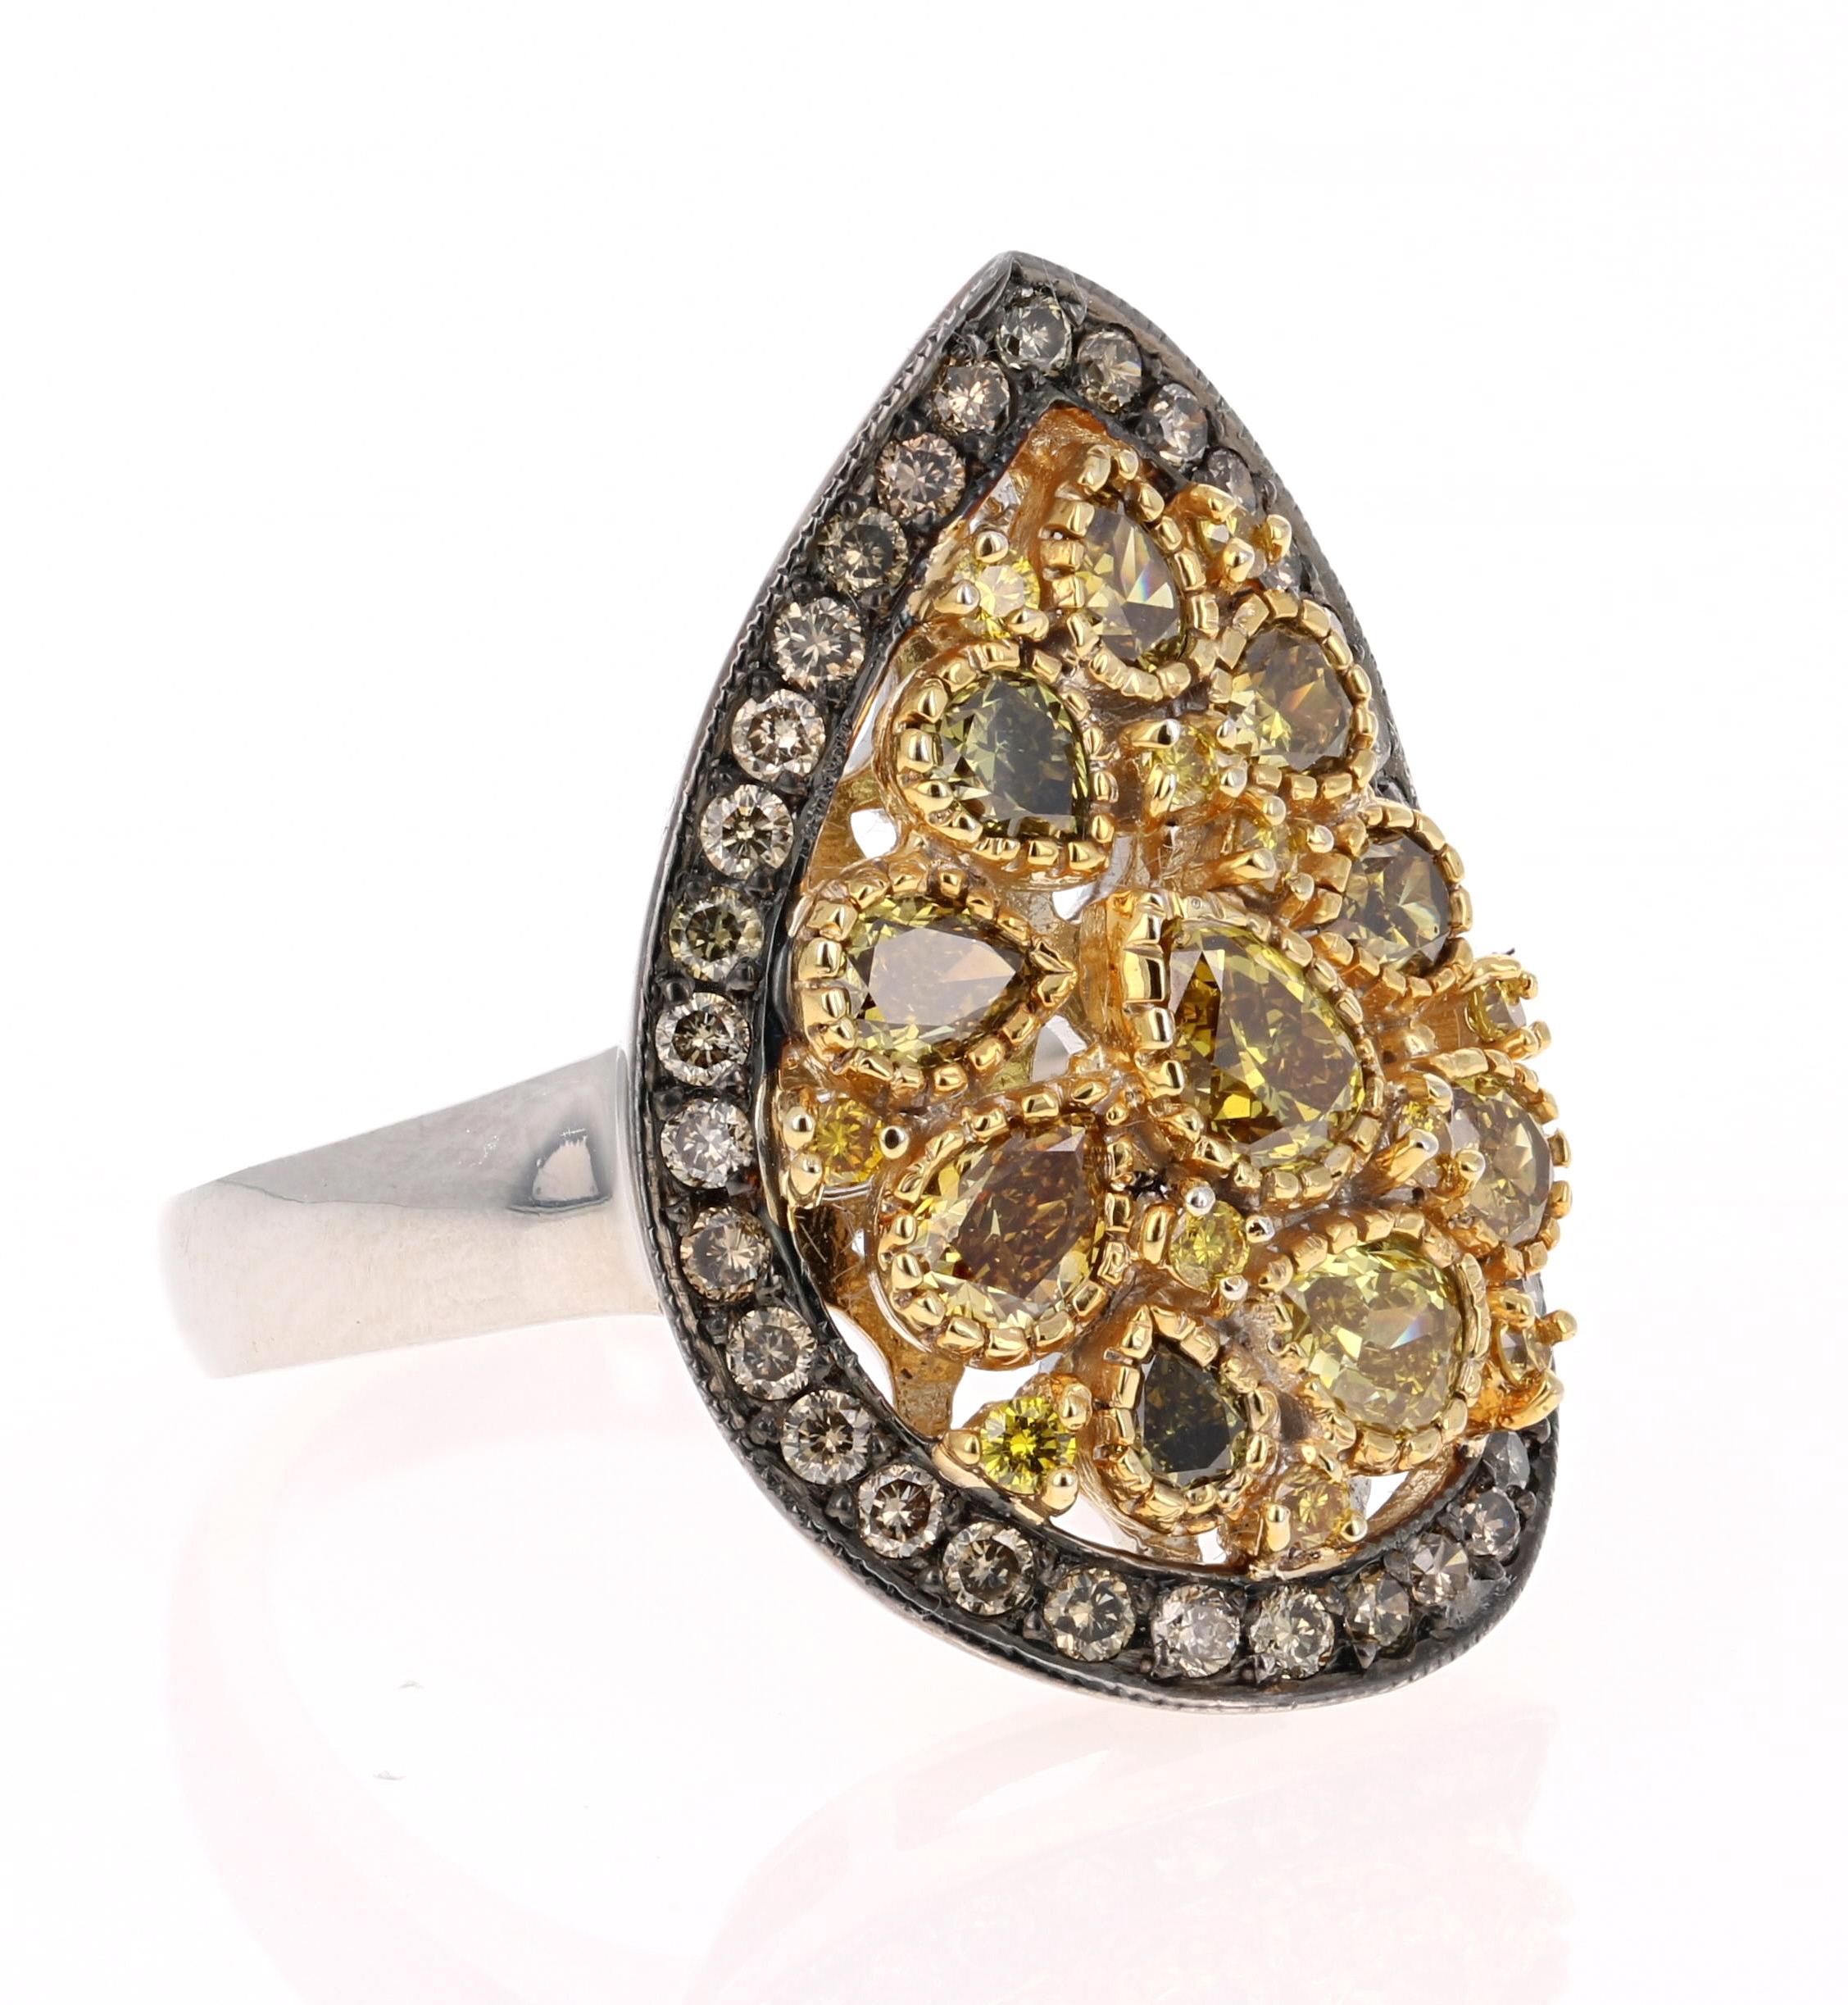 This magnificent beauty has 10 fancy color pear cut natural diamonds that weigh 1.74 Carats. It is further embellished with 35 Champagne Round Cut Diamonds that weigh 0.54 Carats and also adorned with 11 Yellow Round Cut Diamonds that weigh 0.16